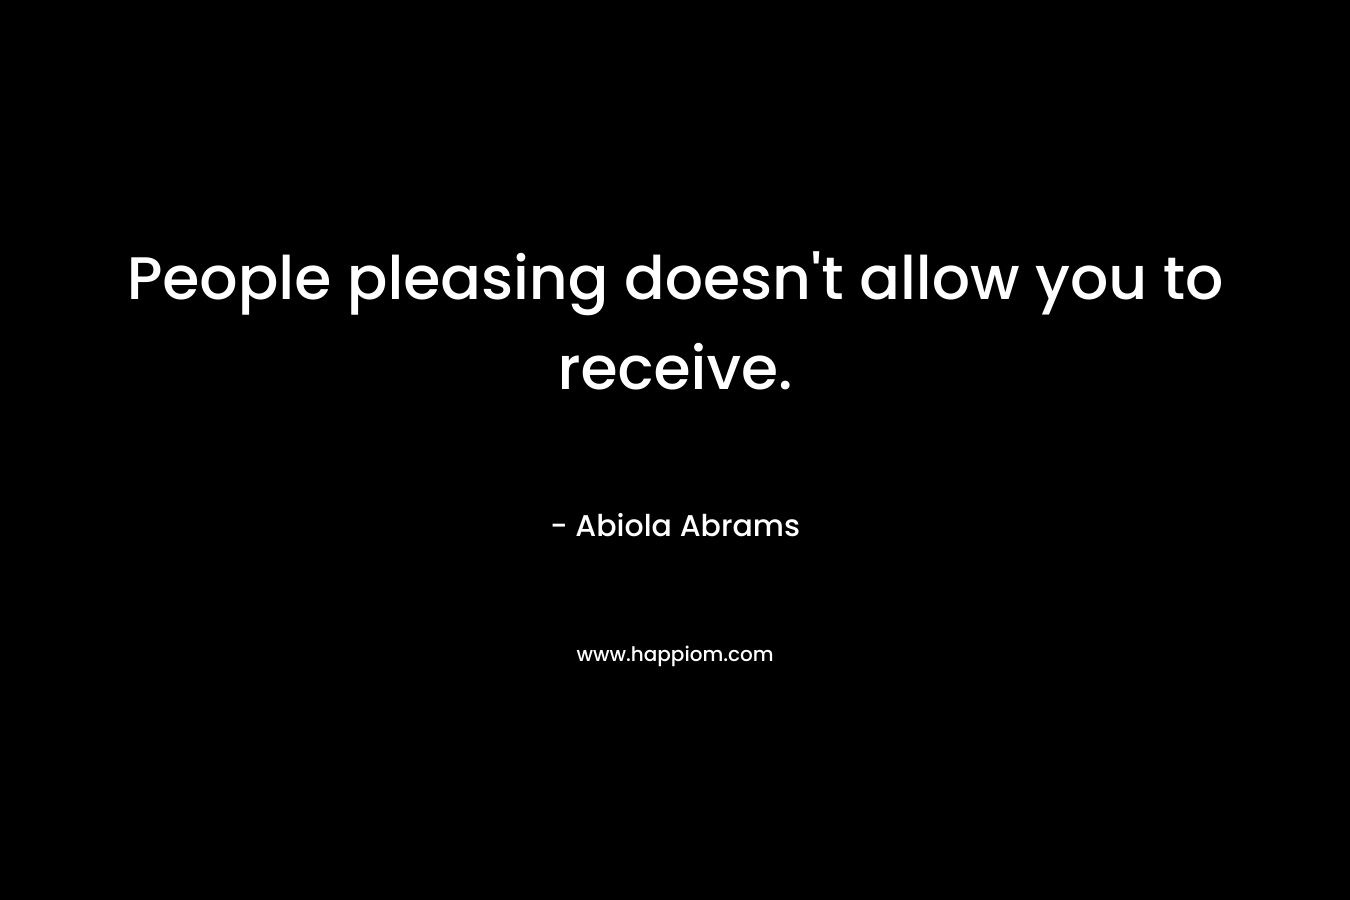 People pleasing doesn’t allow you to receive. – Abiola Abrams